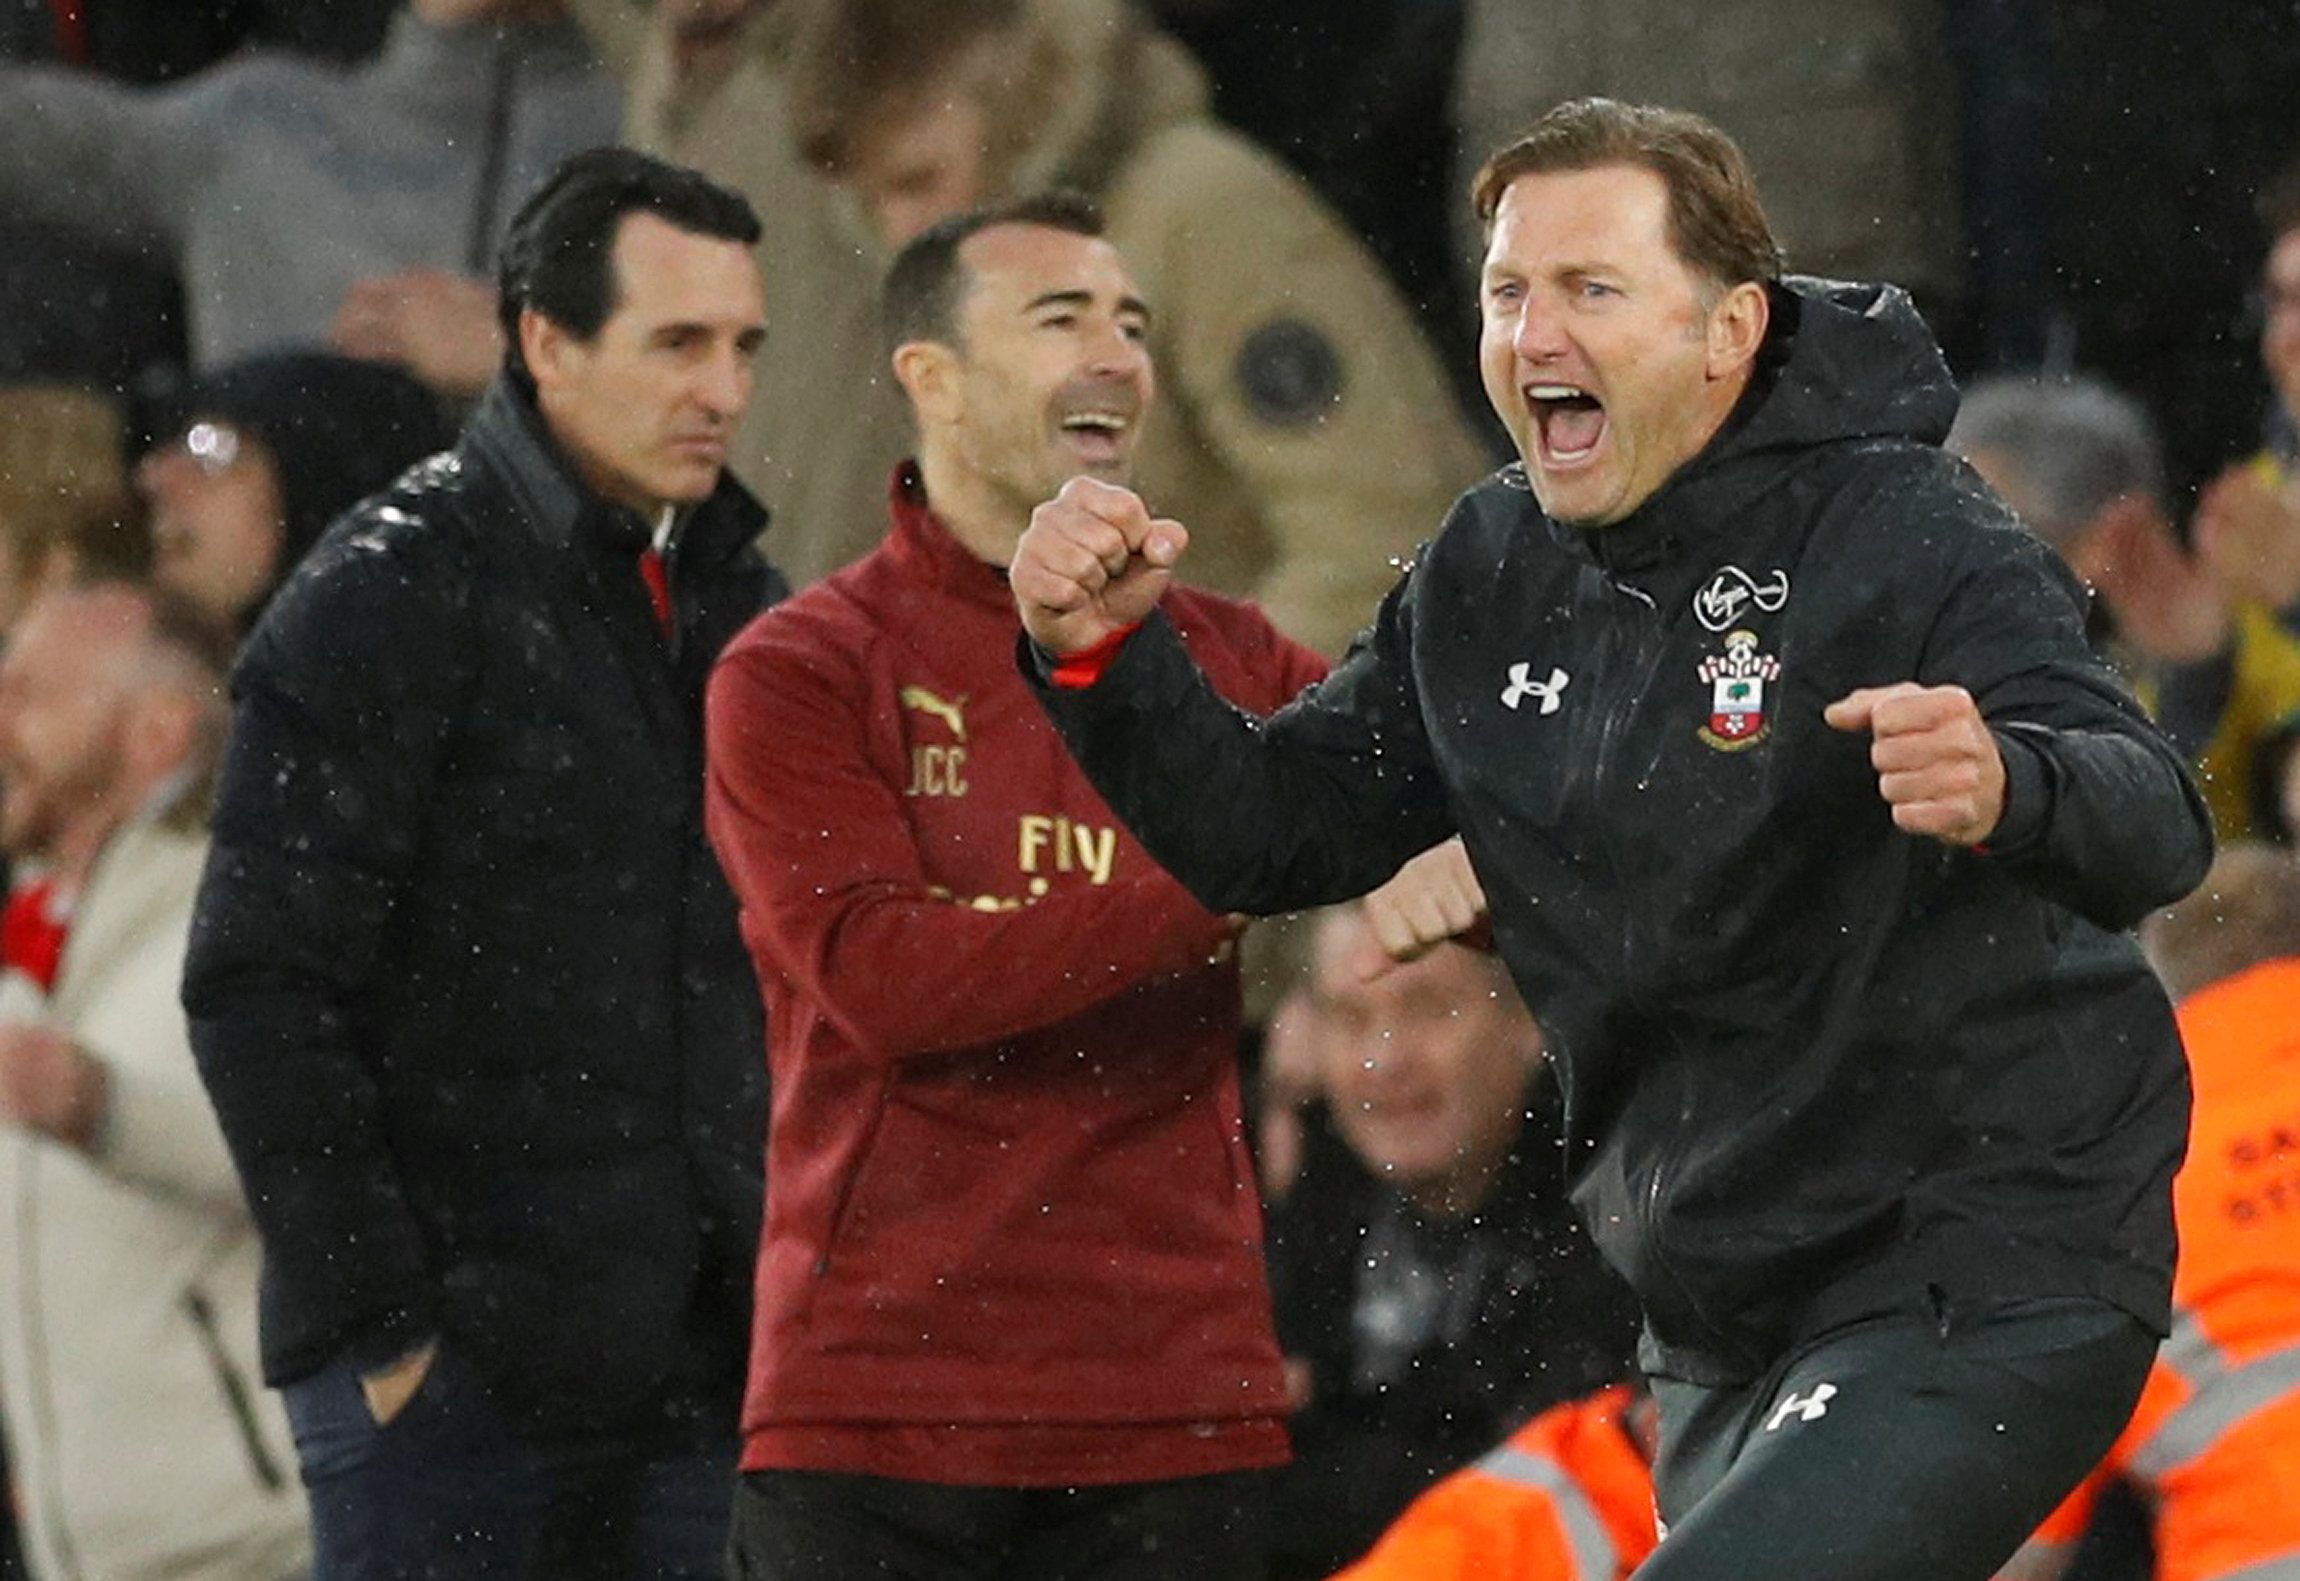 Soccer Football - Premier League - Southampton v Arsenal - St Mary's Stadium, Southampton, Britain - December 16, 2018  Southampton manager Ralph Hasenhuttl celebrates at the end of the match as Arsenal manager Unai Emery looks dejected   Action Images via Reuters/John Sibley  EDITORIAL USE ONLY. No use with unauthorized audio, video, data, fixture lists, club/league logos or "live" services. Online in-match use limited to 75 images, no video emulation. No use in betting, games or single club/le